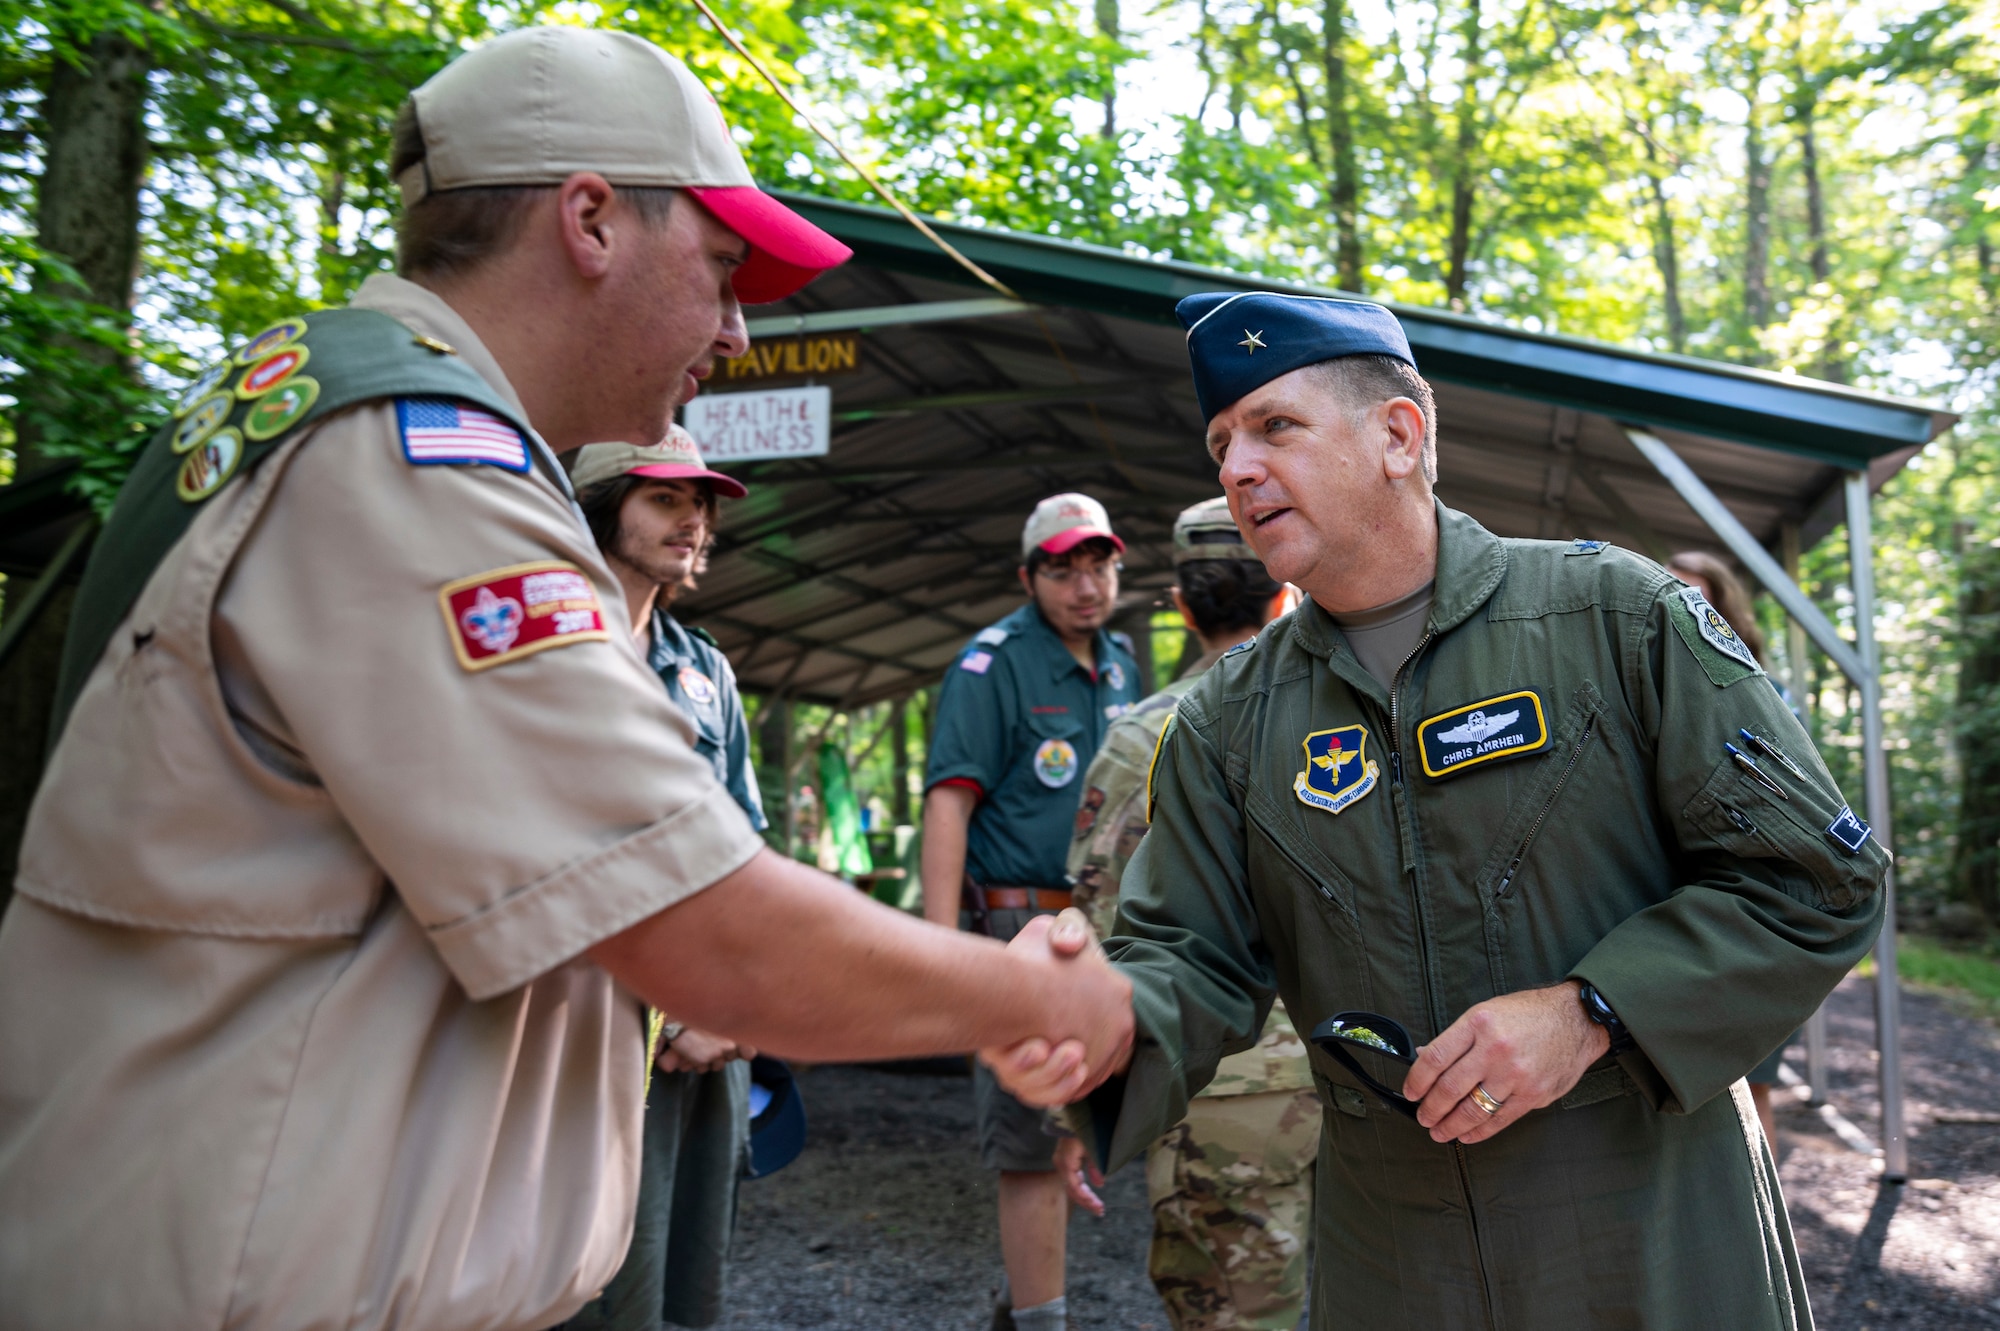 U.S. Air Force Brig. Gen. Christopher Amrhein, Air Force Recruiting Service commander, meets Boy Scouts of America staff and camp counselors at Camp Minsi in Pocono Summit, Penn., July 22, 2023.